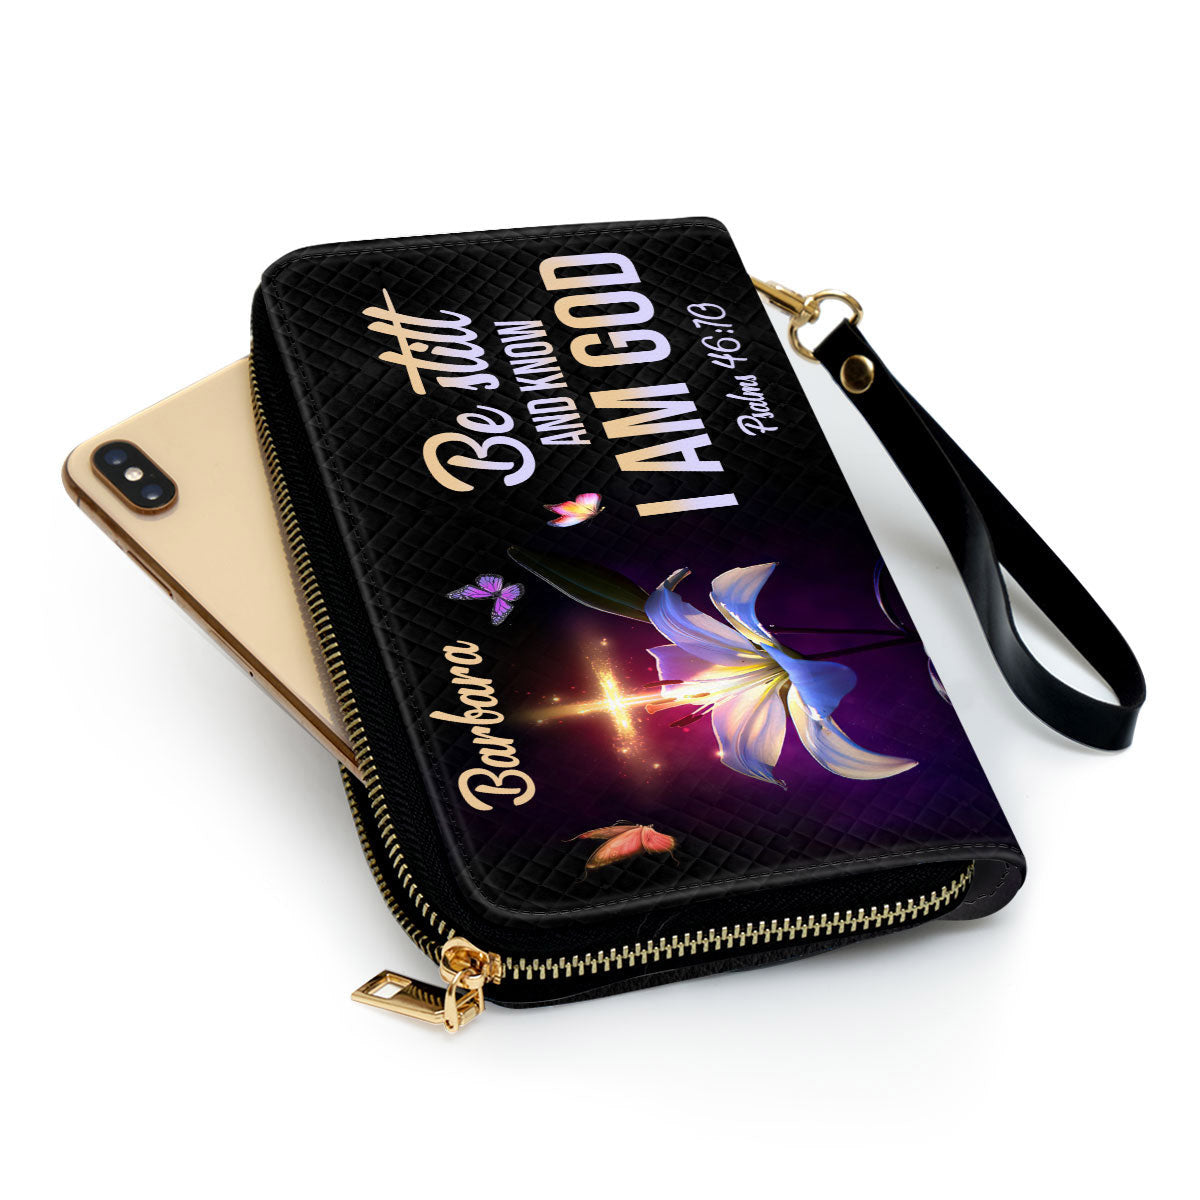 Be Still And Know That I Am God - Meaningful Personalized Clutch Purse - Women Clutch Purse